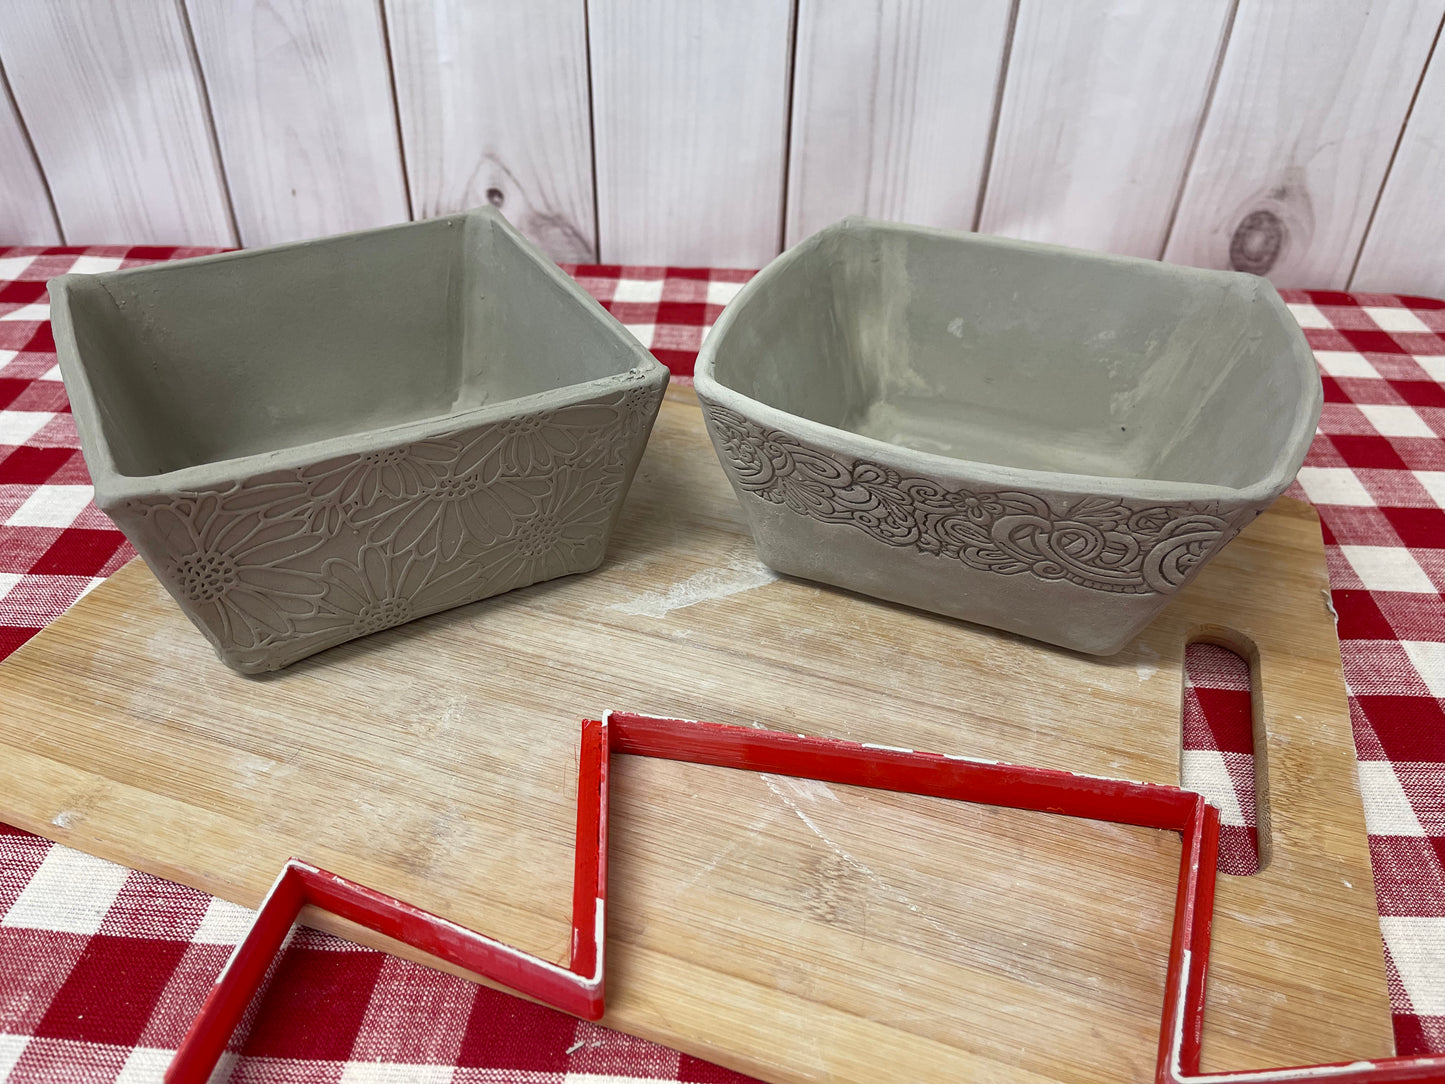 Square Bowl Template Clay Cutter - multiple sizes, each or set